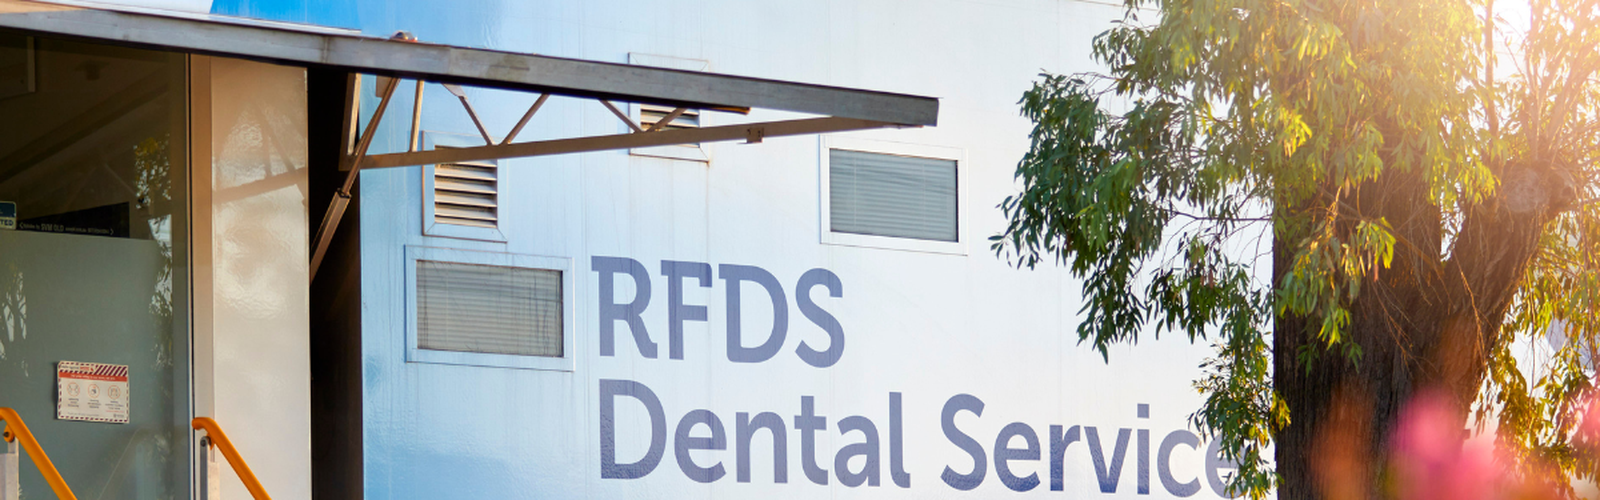 RFDS dental service mobile surgery